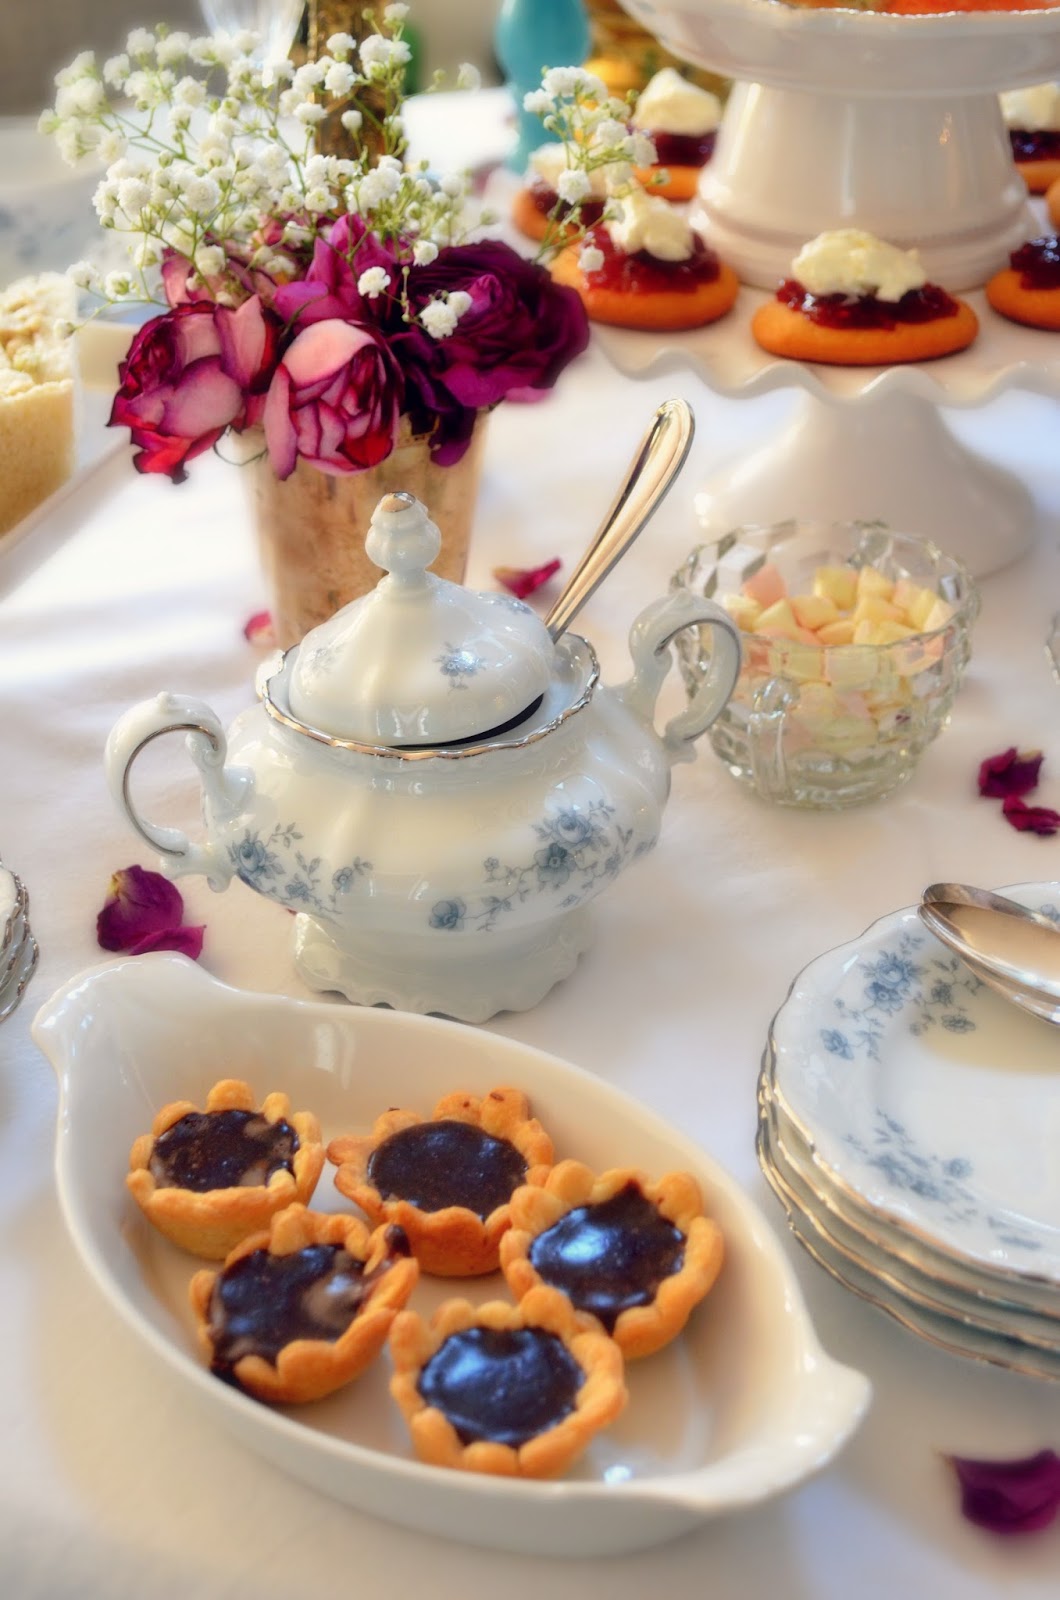 3 Simple How-To Tips for Hosting An Afternoon High Tea with Veuve Clicquot Champagne